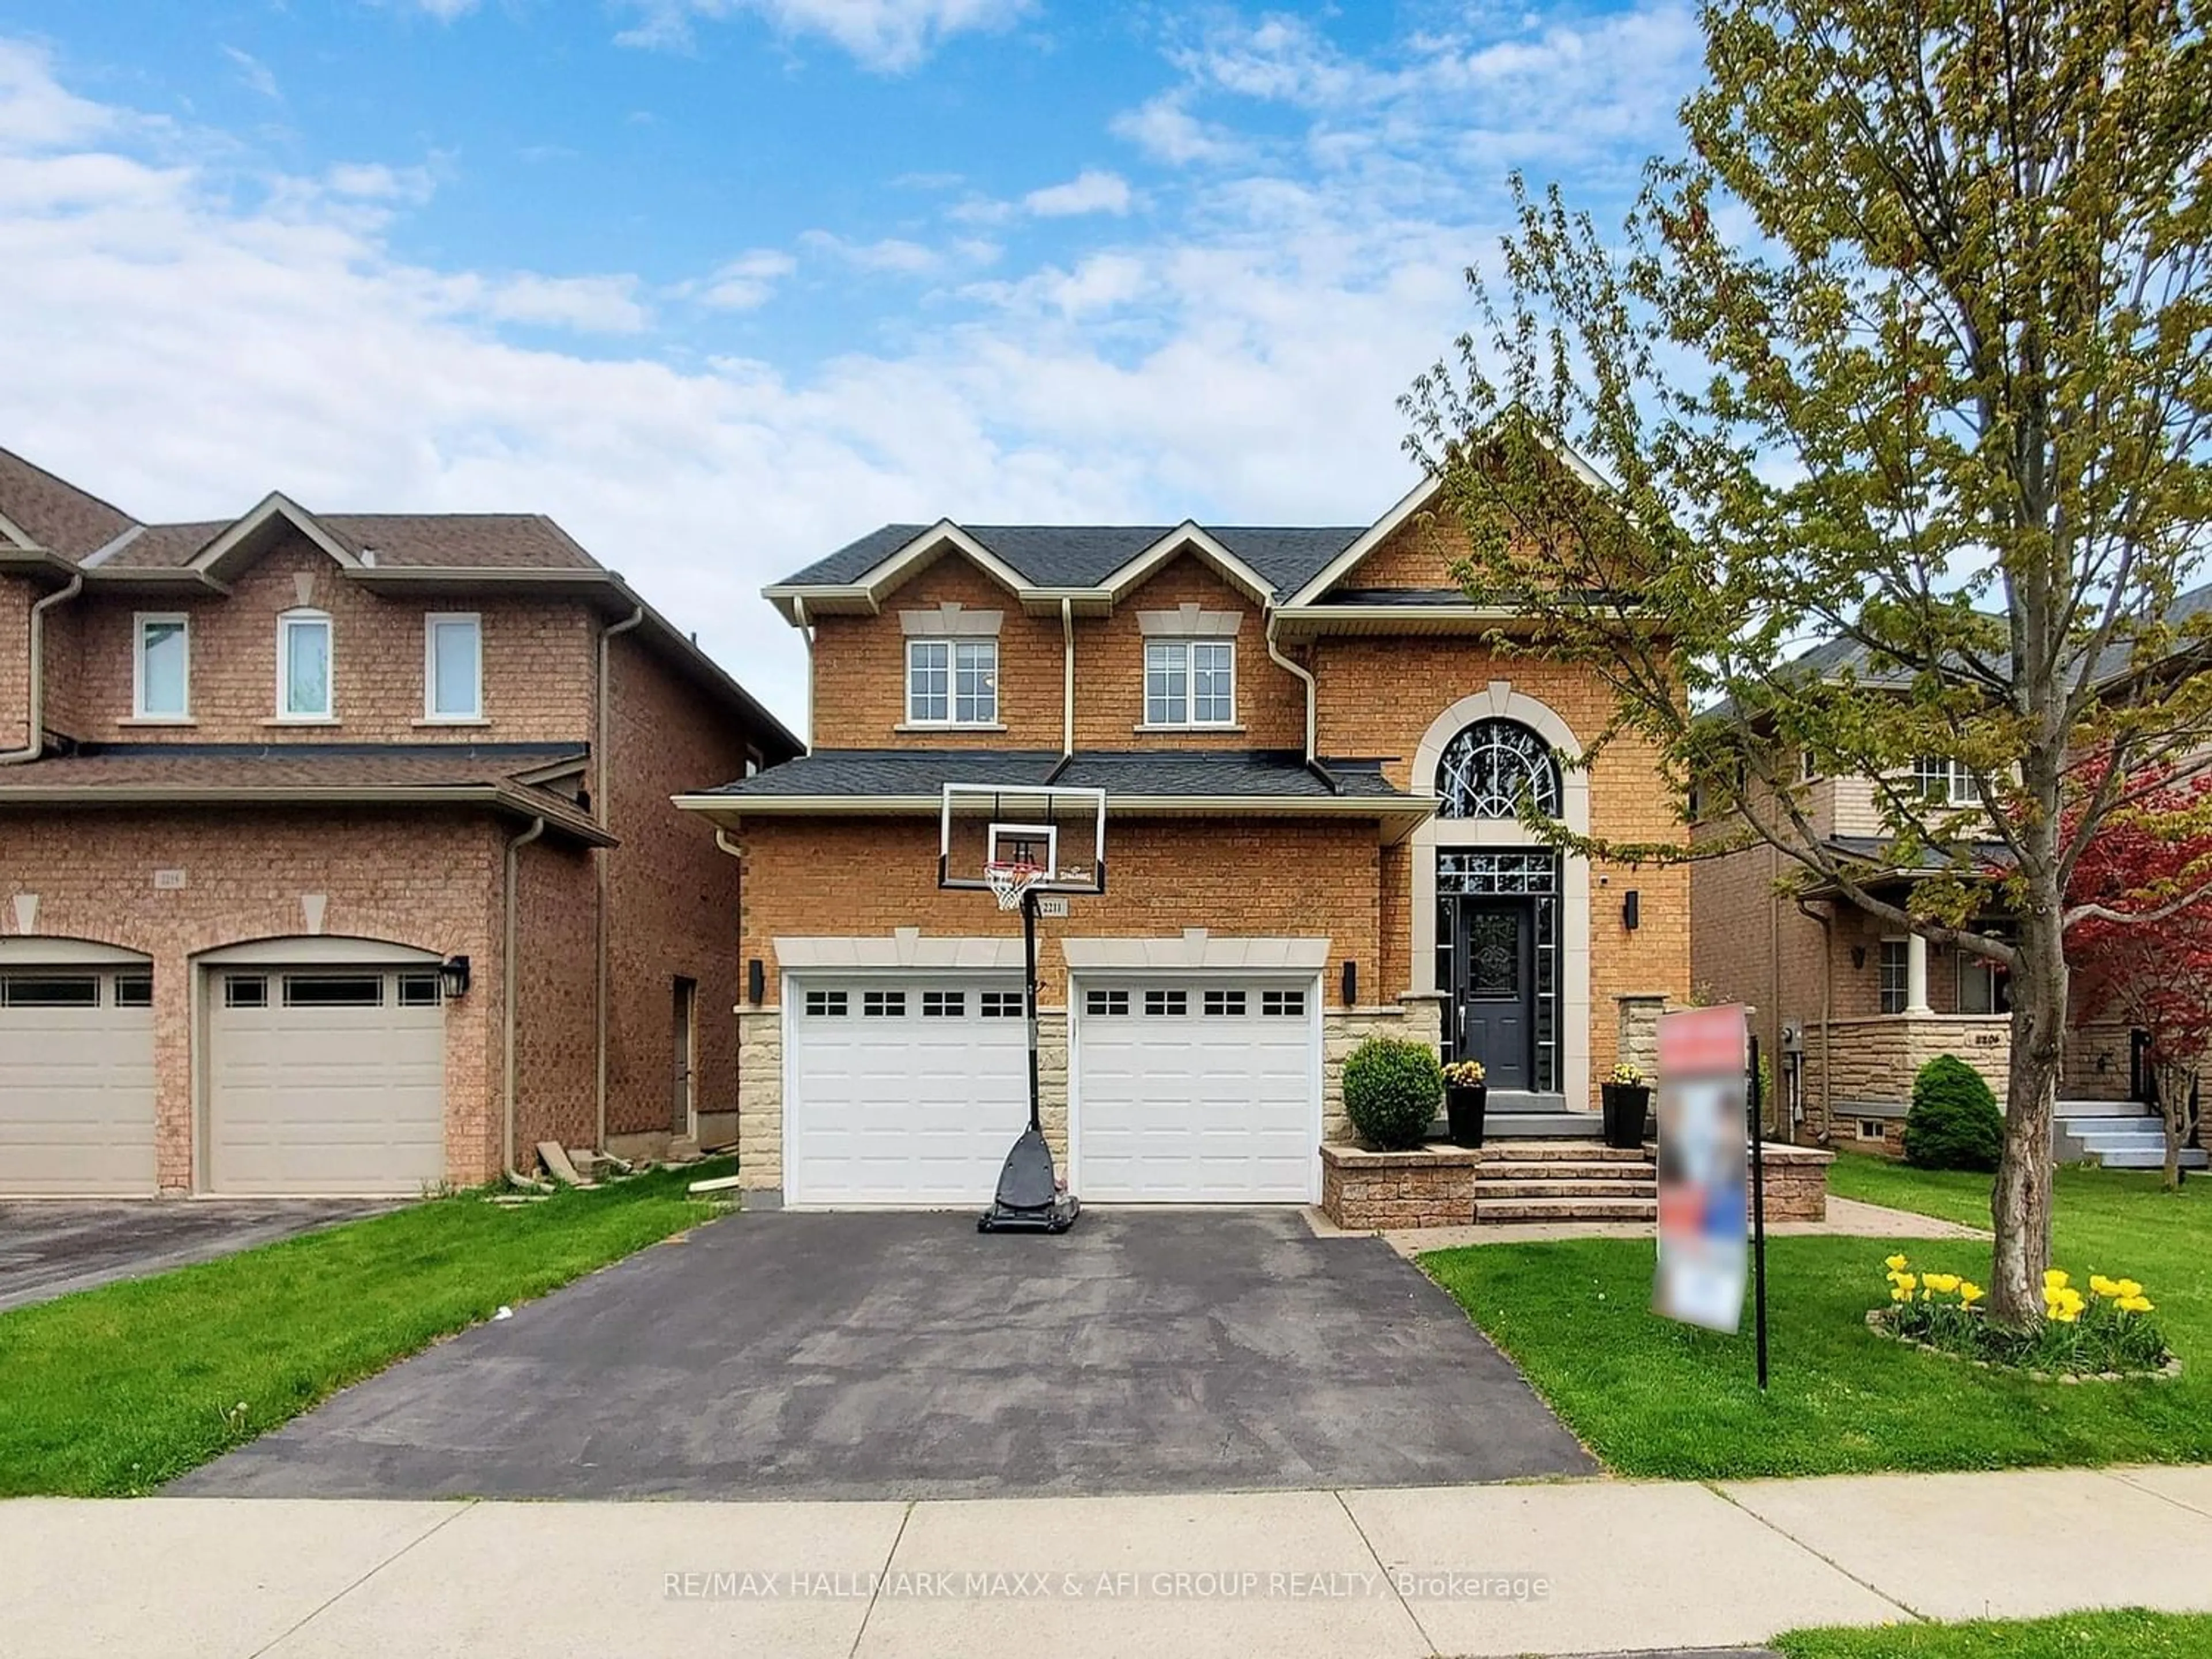 Home with brick exterior material for 2211 Stratus Dr, Oakville Ontario L6M 4W5